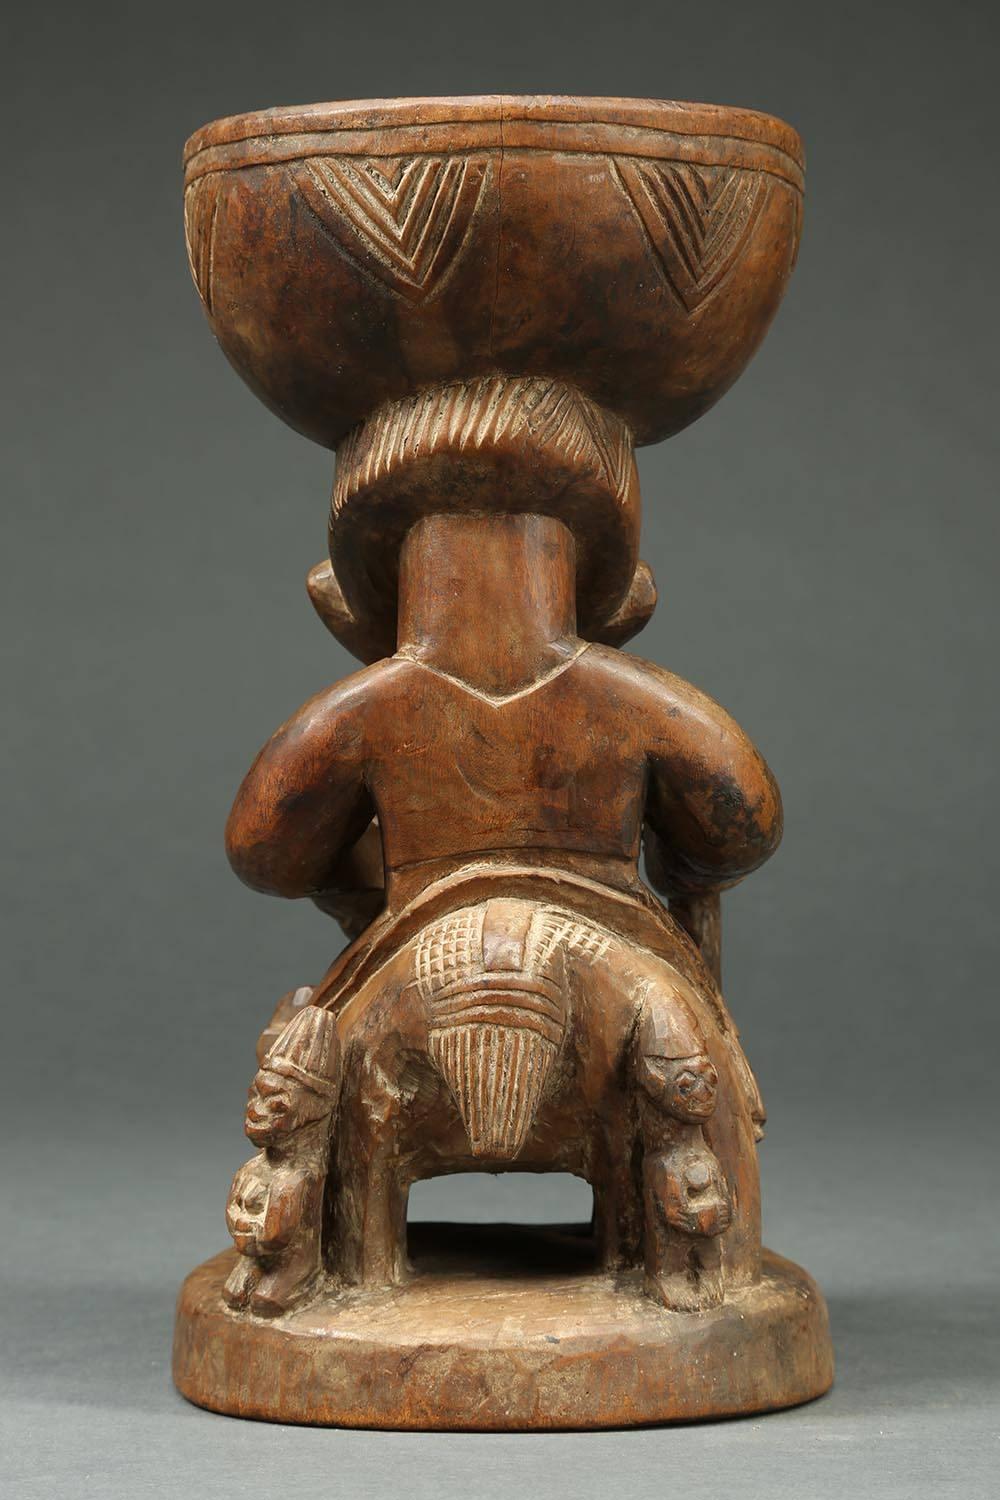 Wood Yoruba Tribal Offering Bowl with Horse and Rider, Nigeria